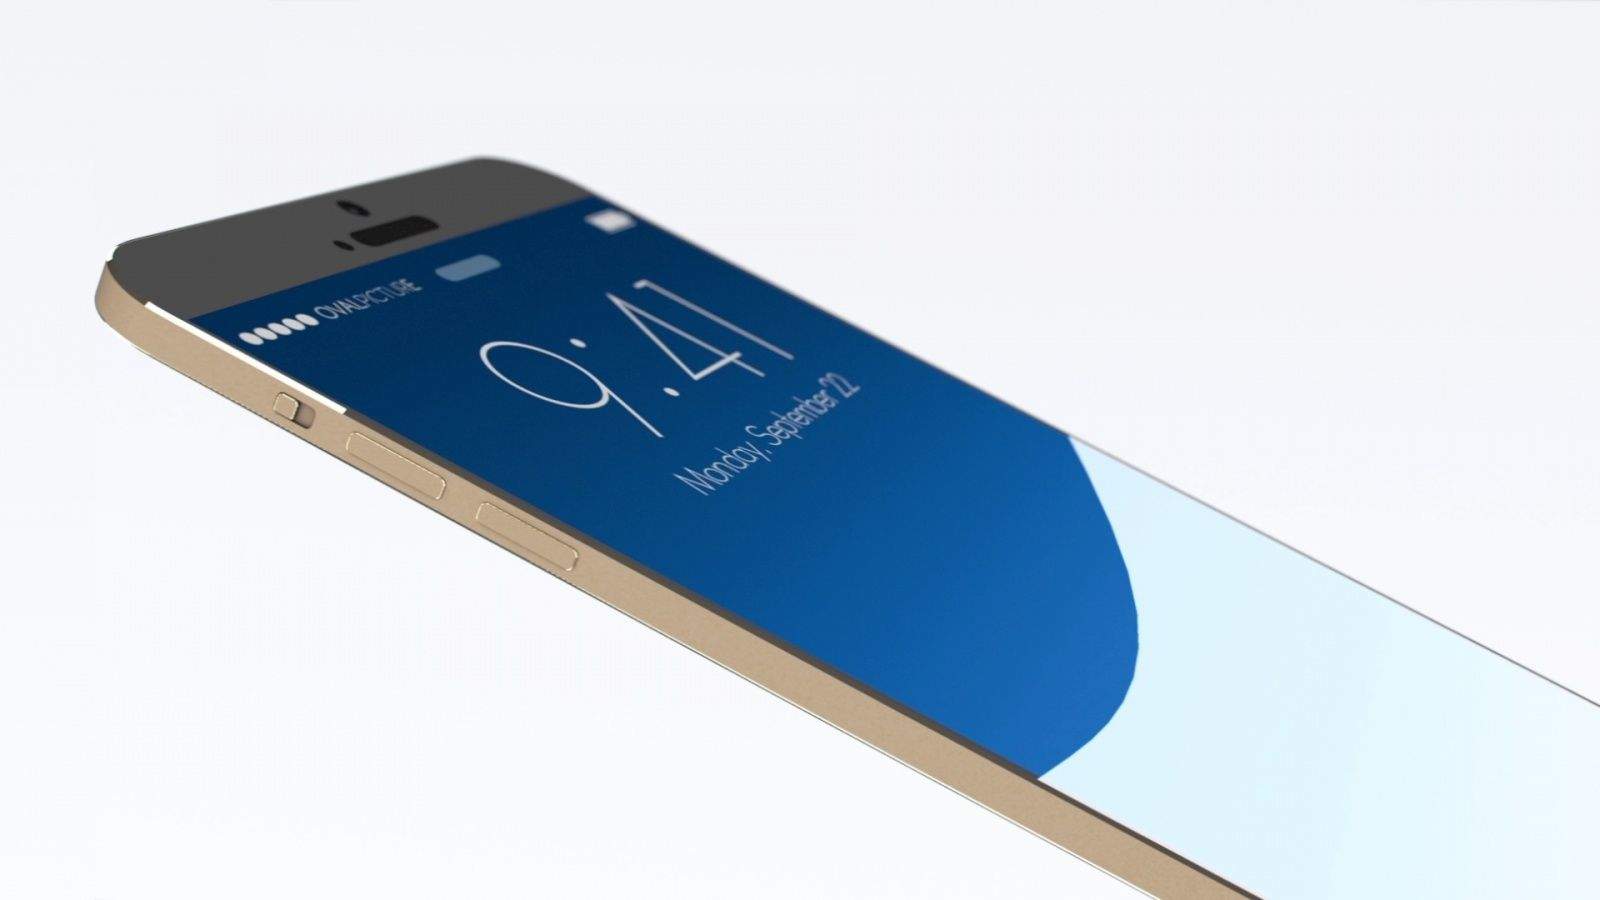 iPhone 6 production is ramping up